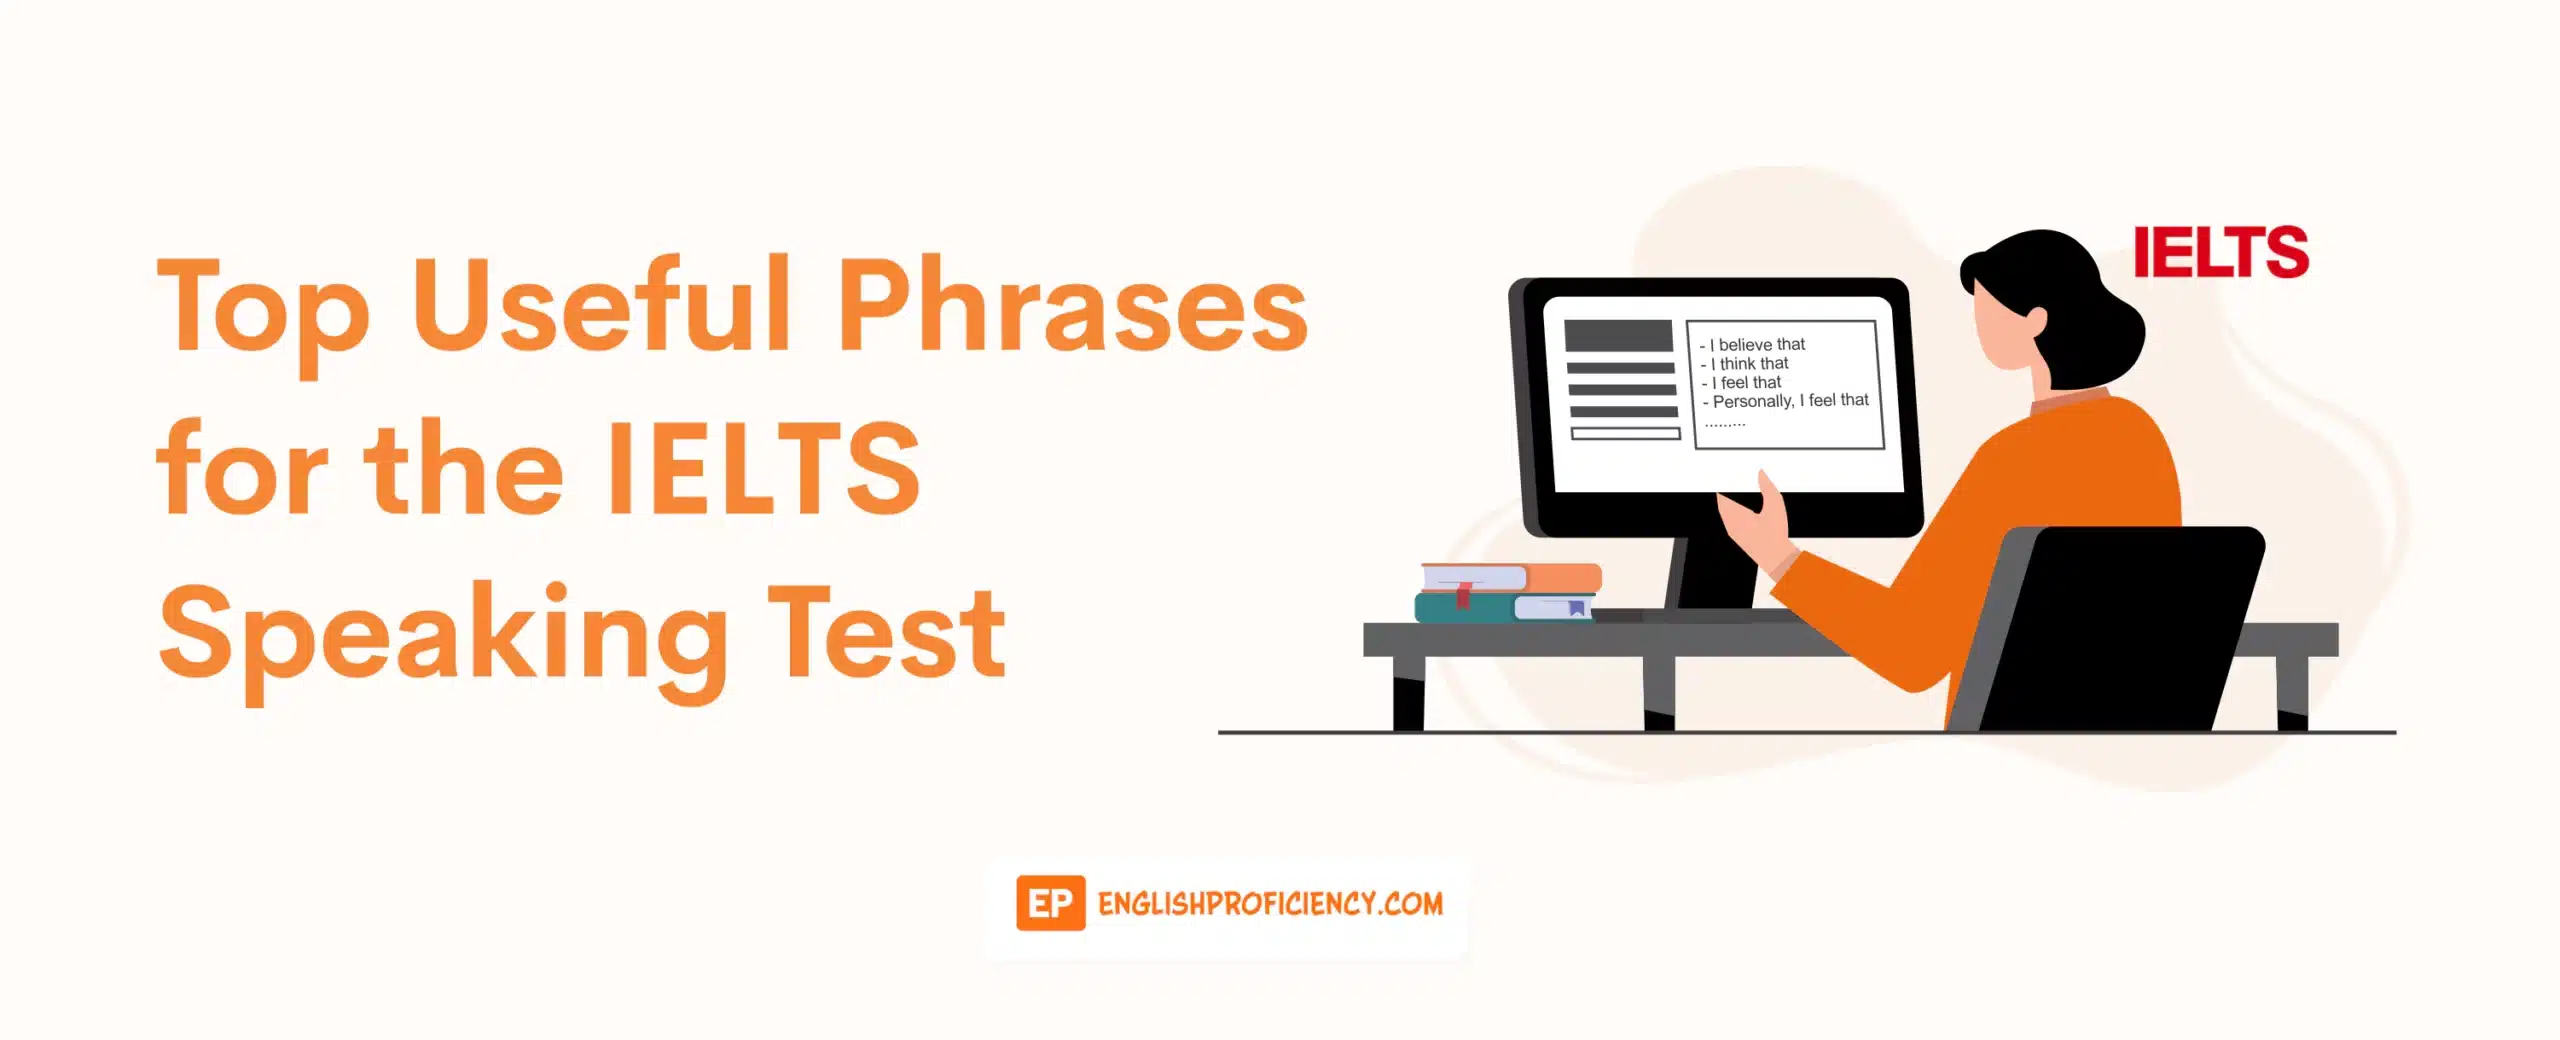 Top Useful Phrases for the IELTS Speaking Test